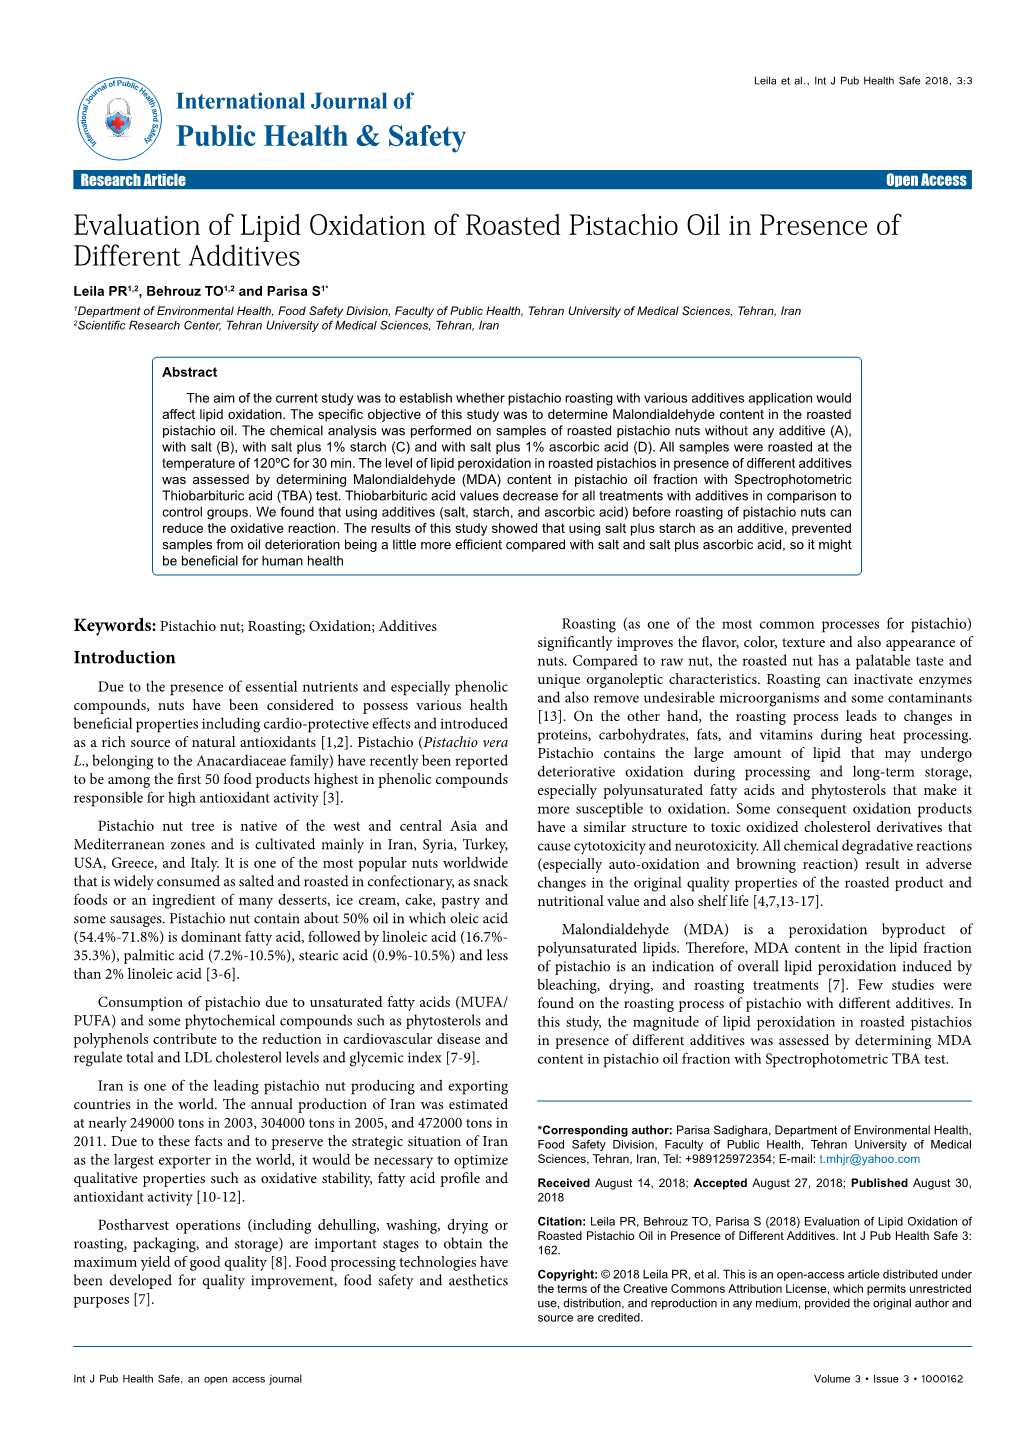 Evaluation of Lipid Oxidation of Roasted Pistachio Oil in Presence of Different Additives